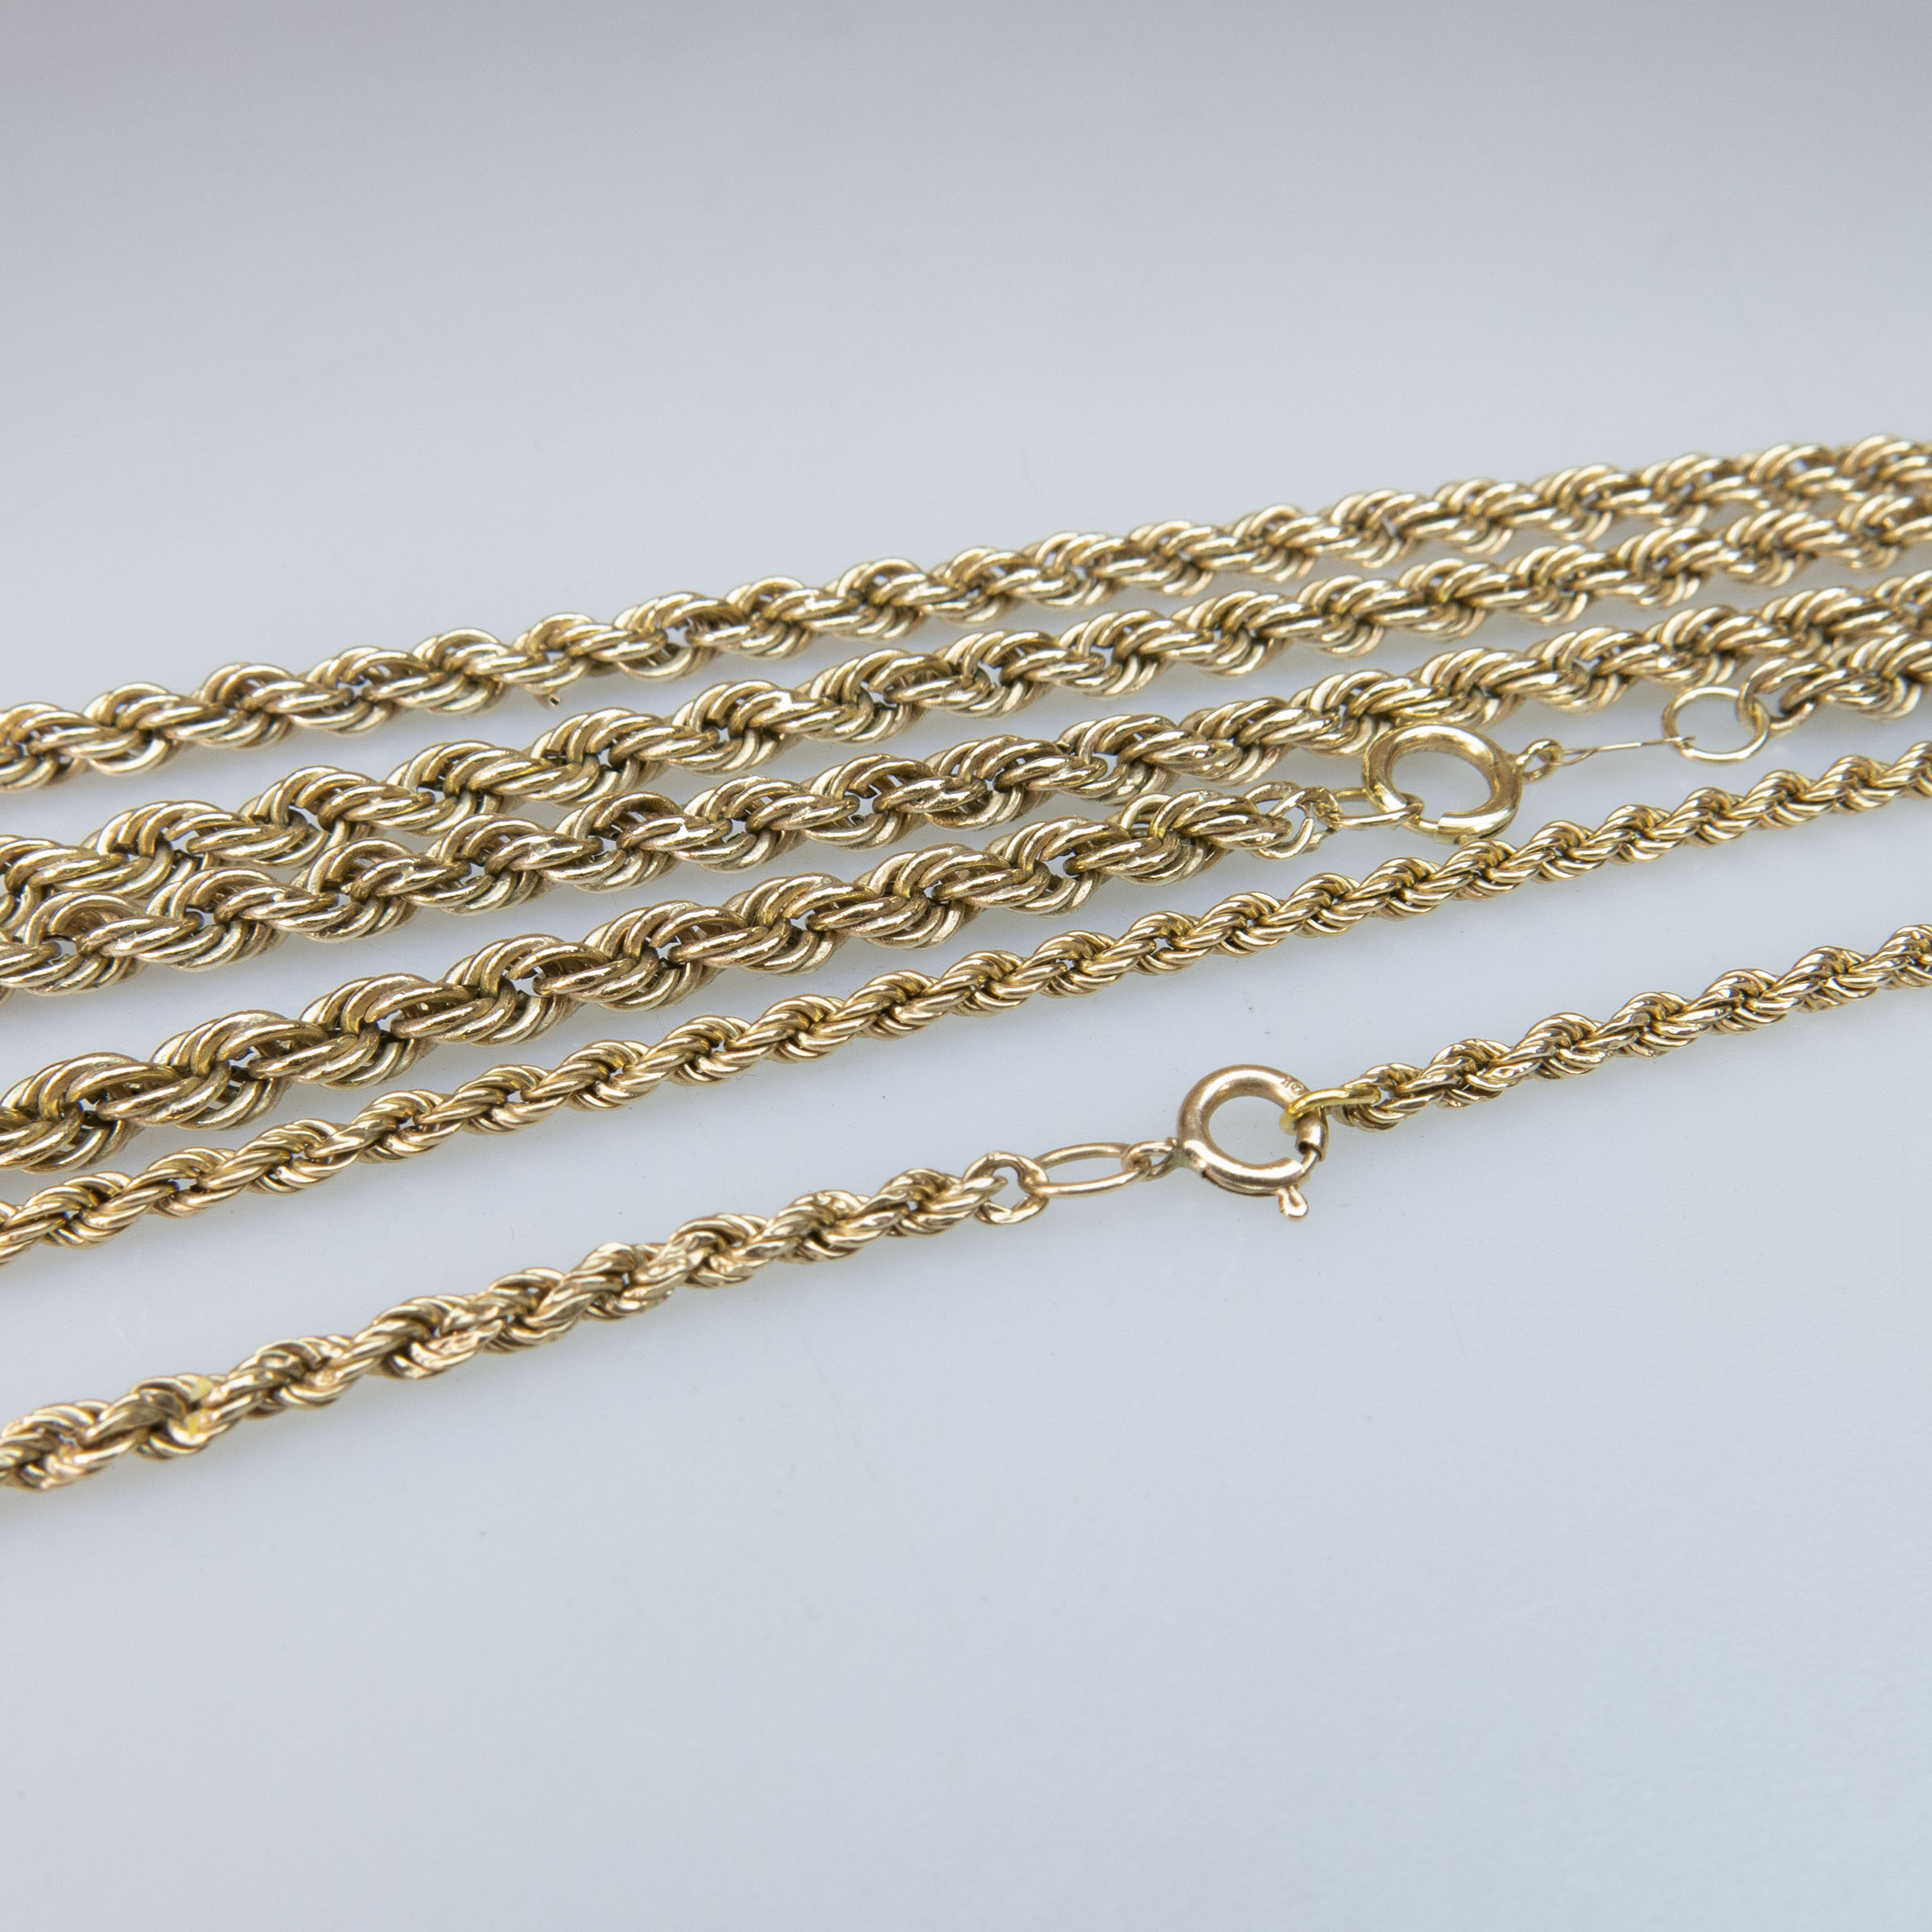 2 x 10k Yellow Gold Rope Chains